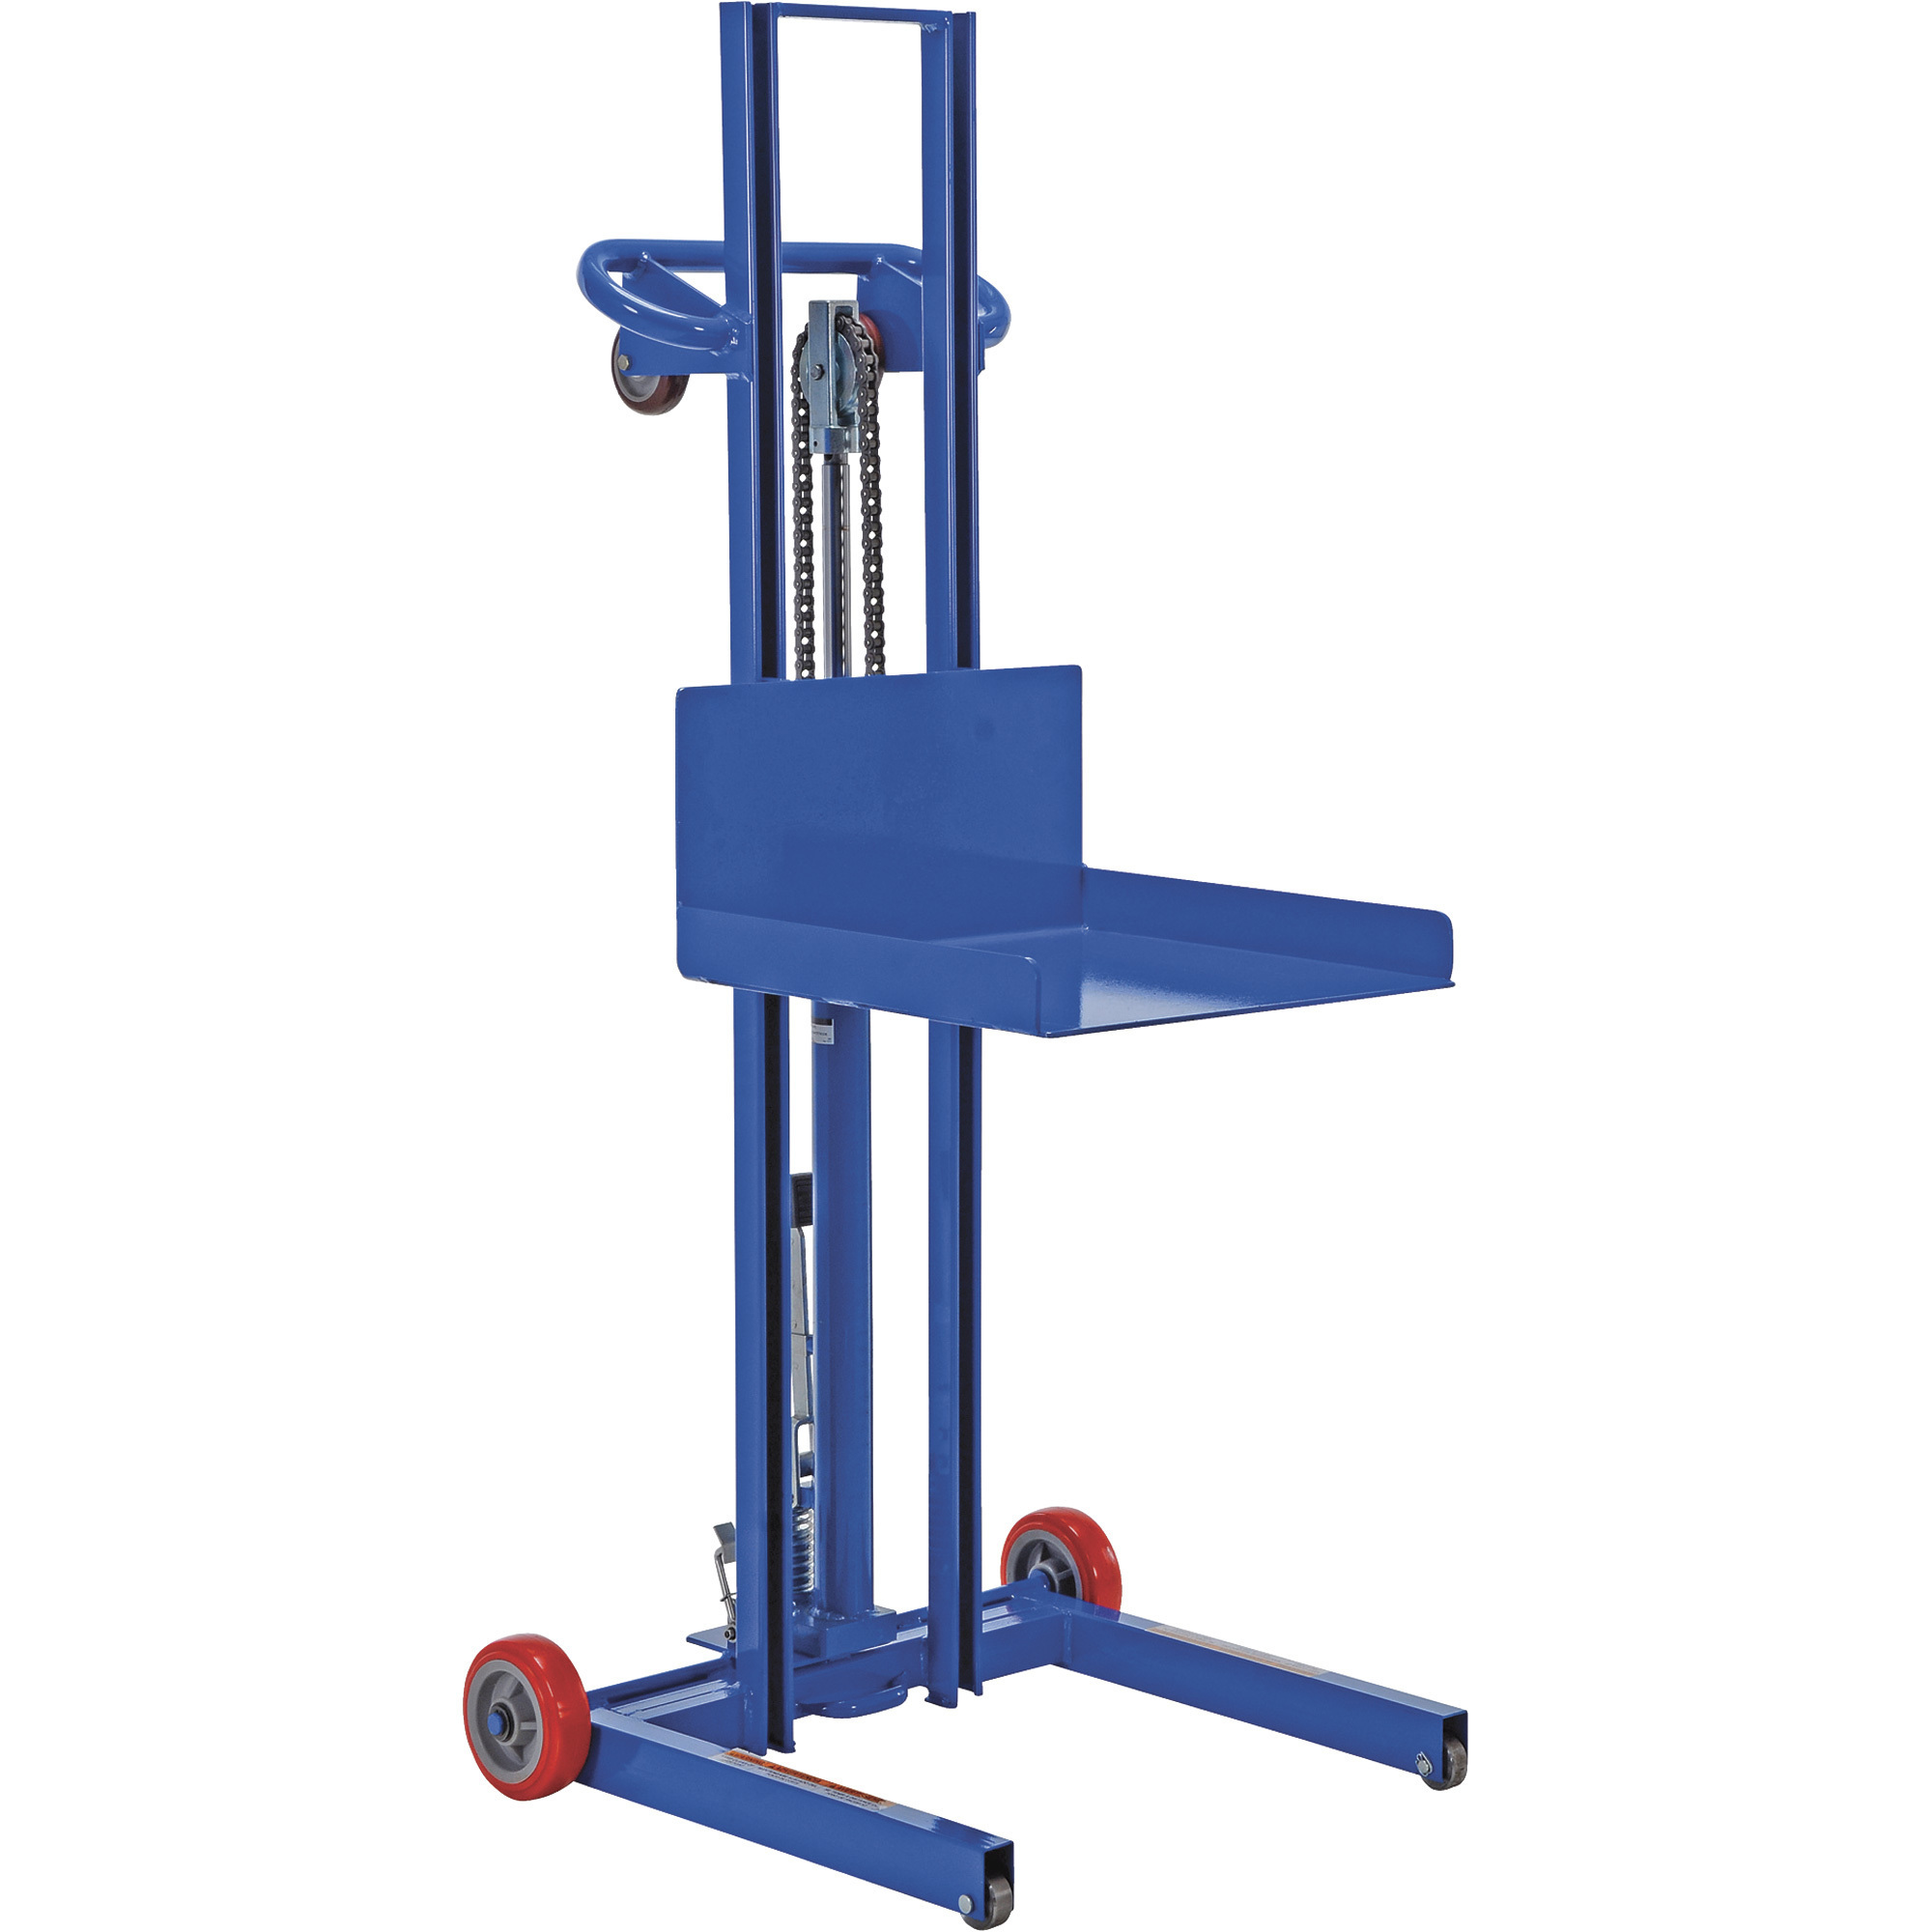 Vestil Low-Profile Lite Load Lift with Hydraulic (Foot Pump) Operation, Model LLPH-500-FW